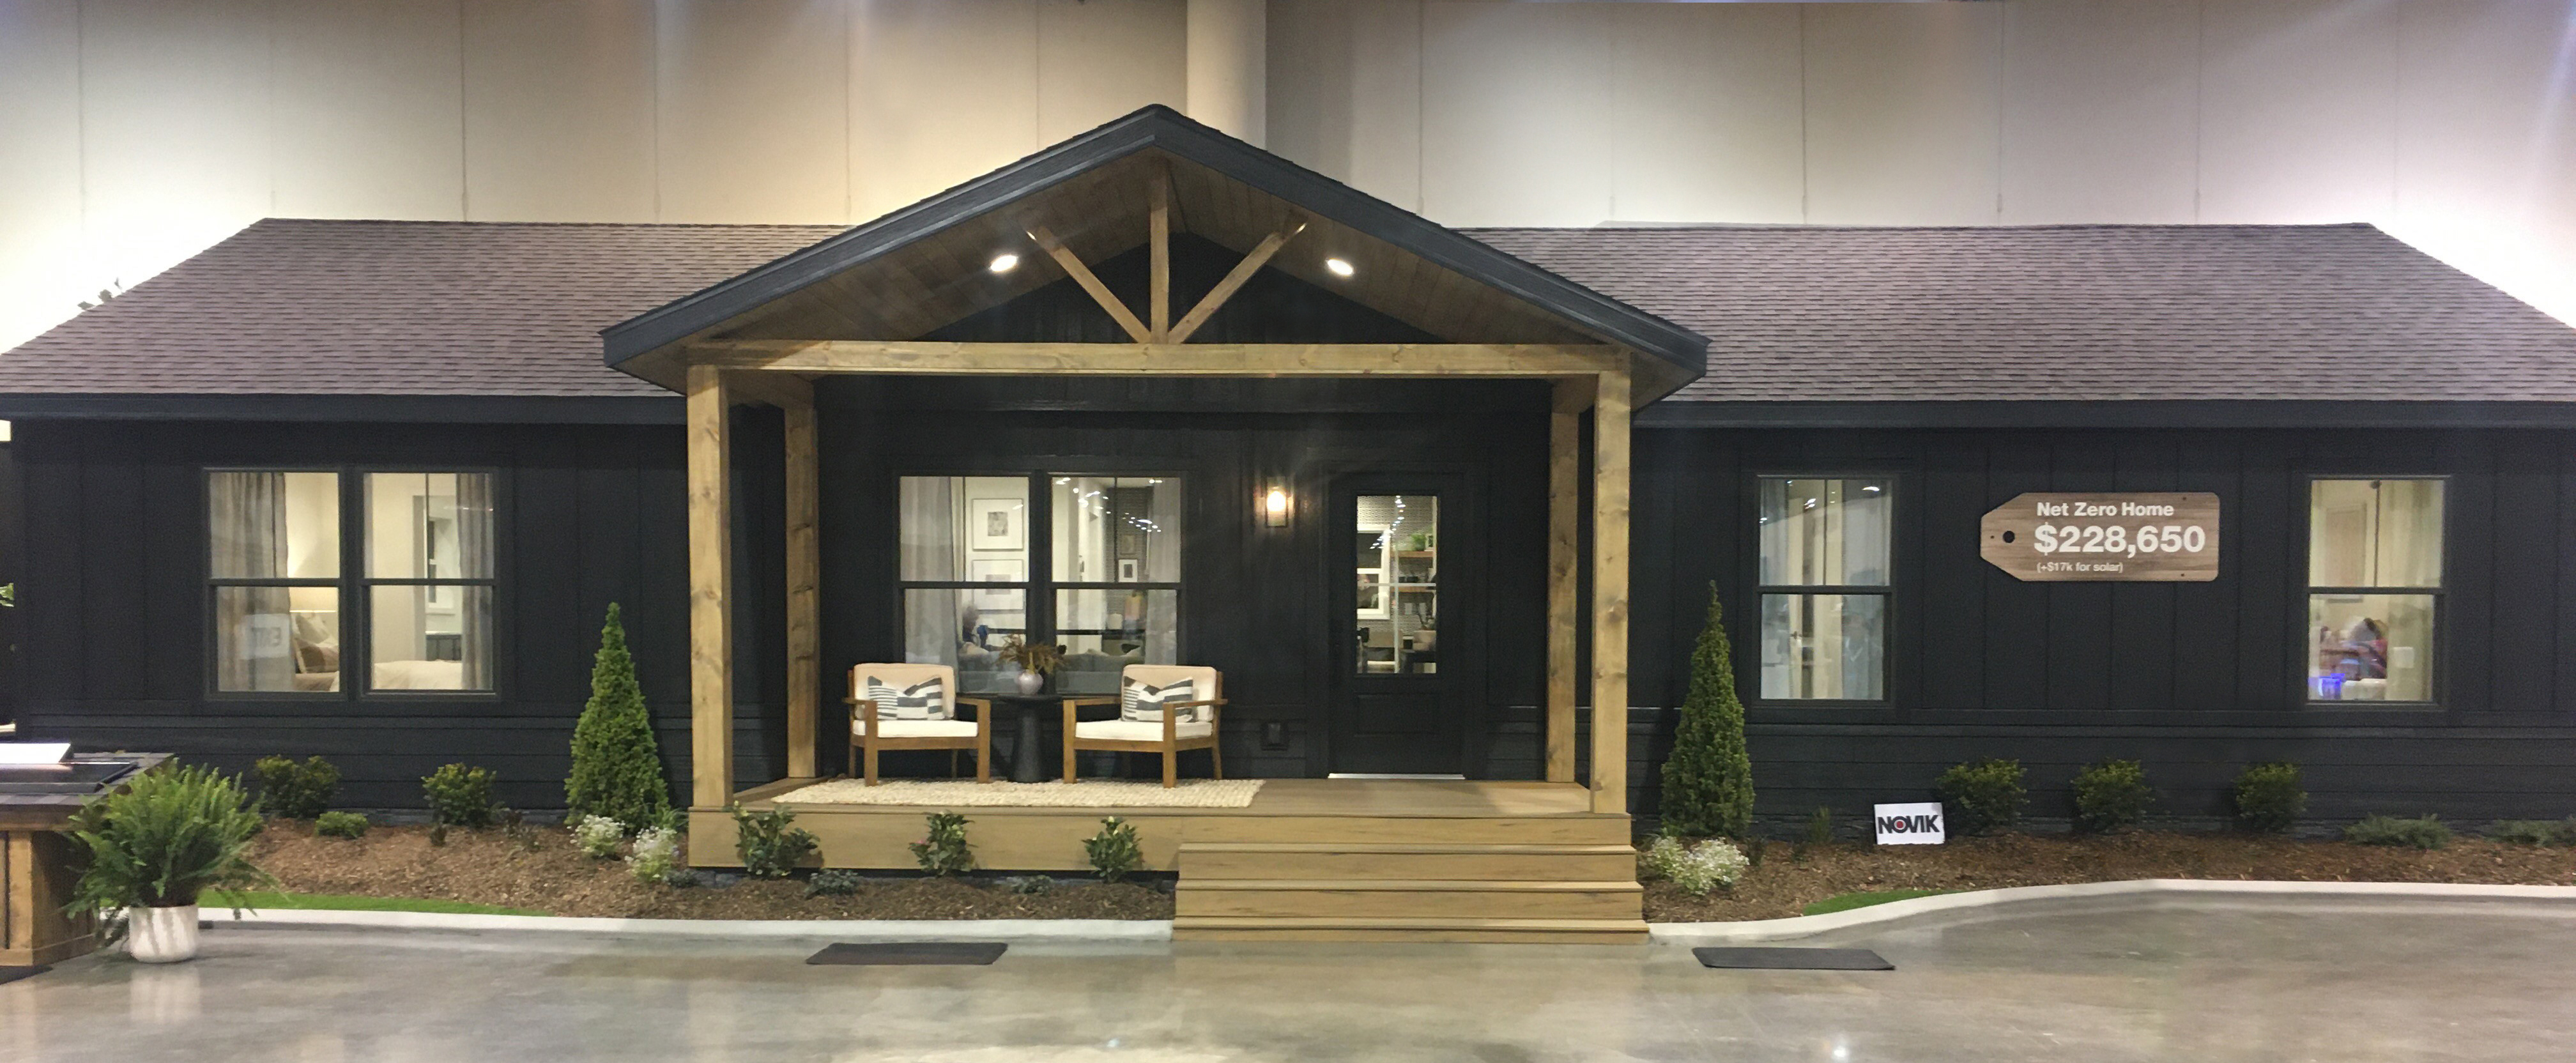 Clayton Home's Net-Zero Home at the Berkshire Hathaway Annual Meeting.